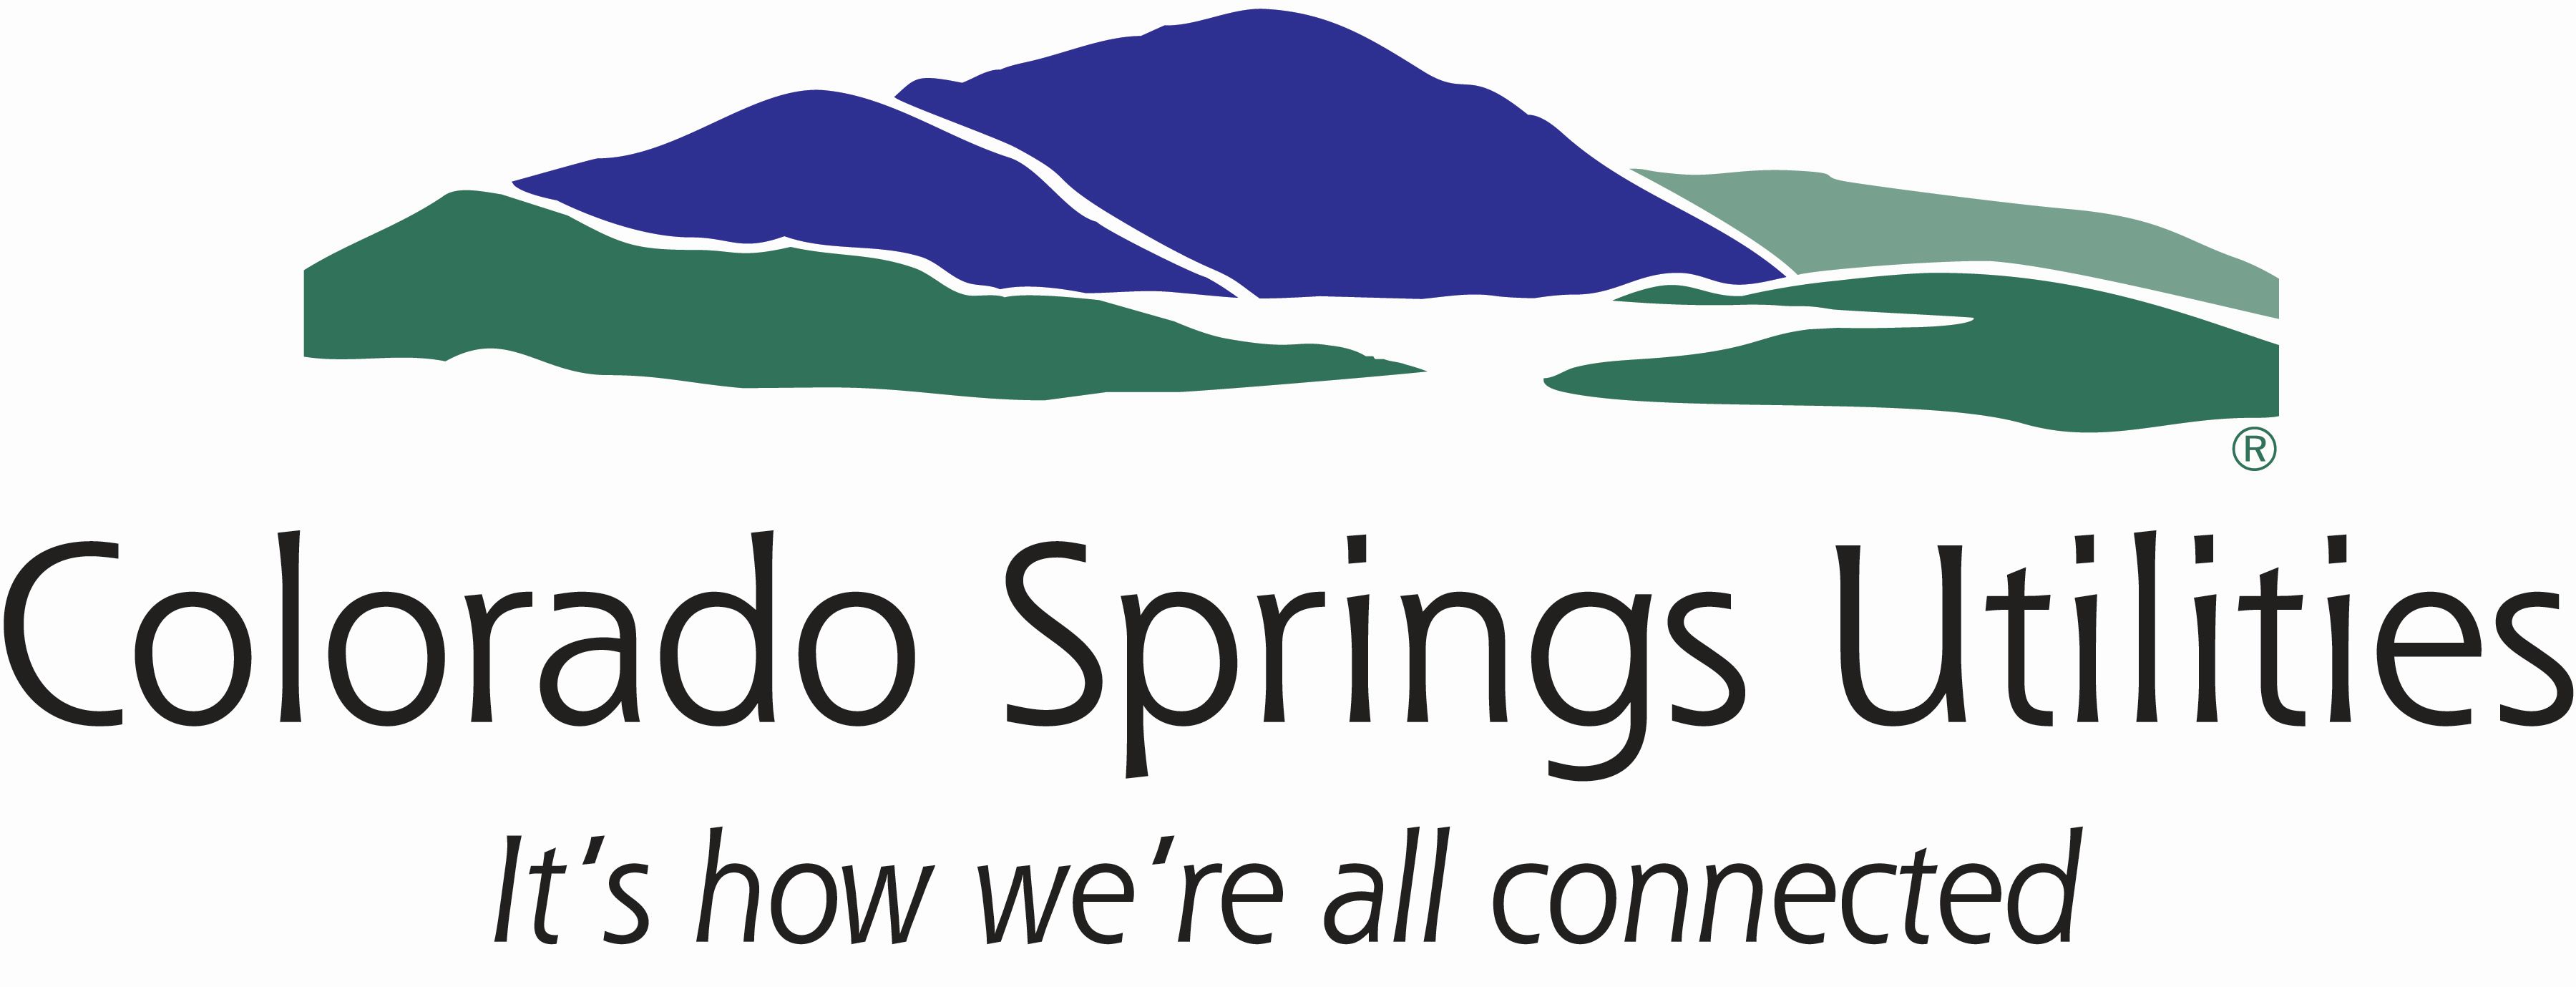 about-200-000-colorado-springs-utilities-accounts-accessed-in-recent